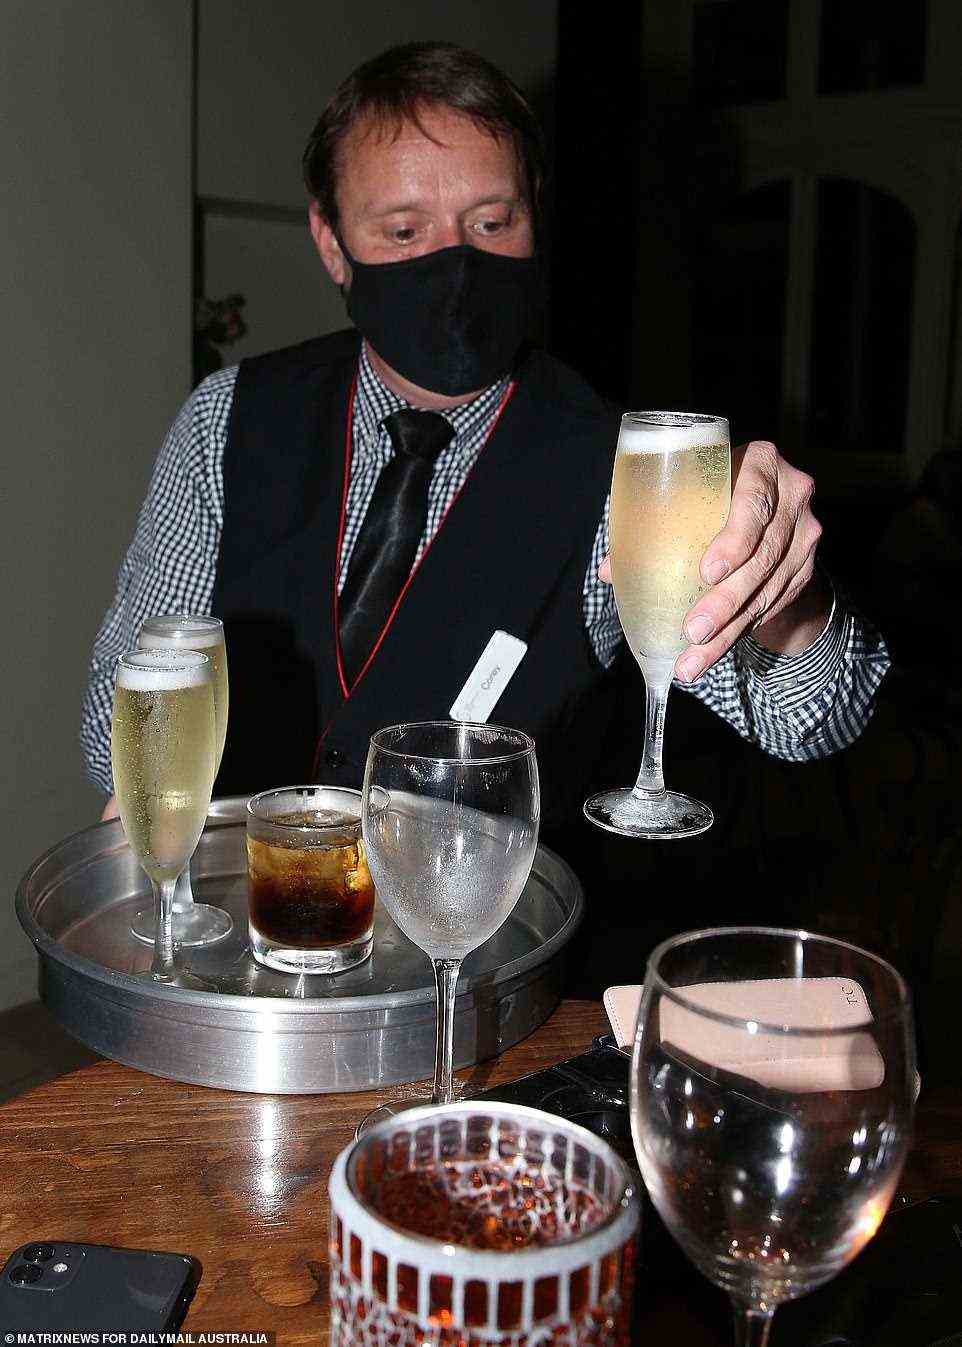 A server wearing a face mask places a glass of sparkling wine down on the table as the celebrations get underway